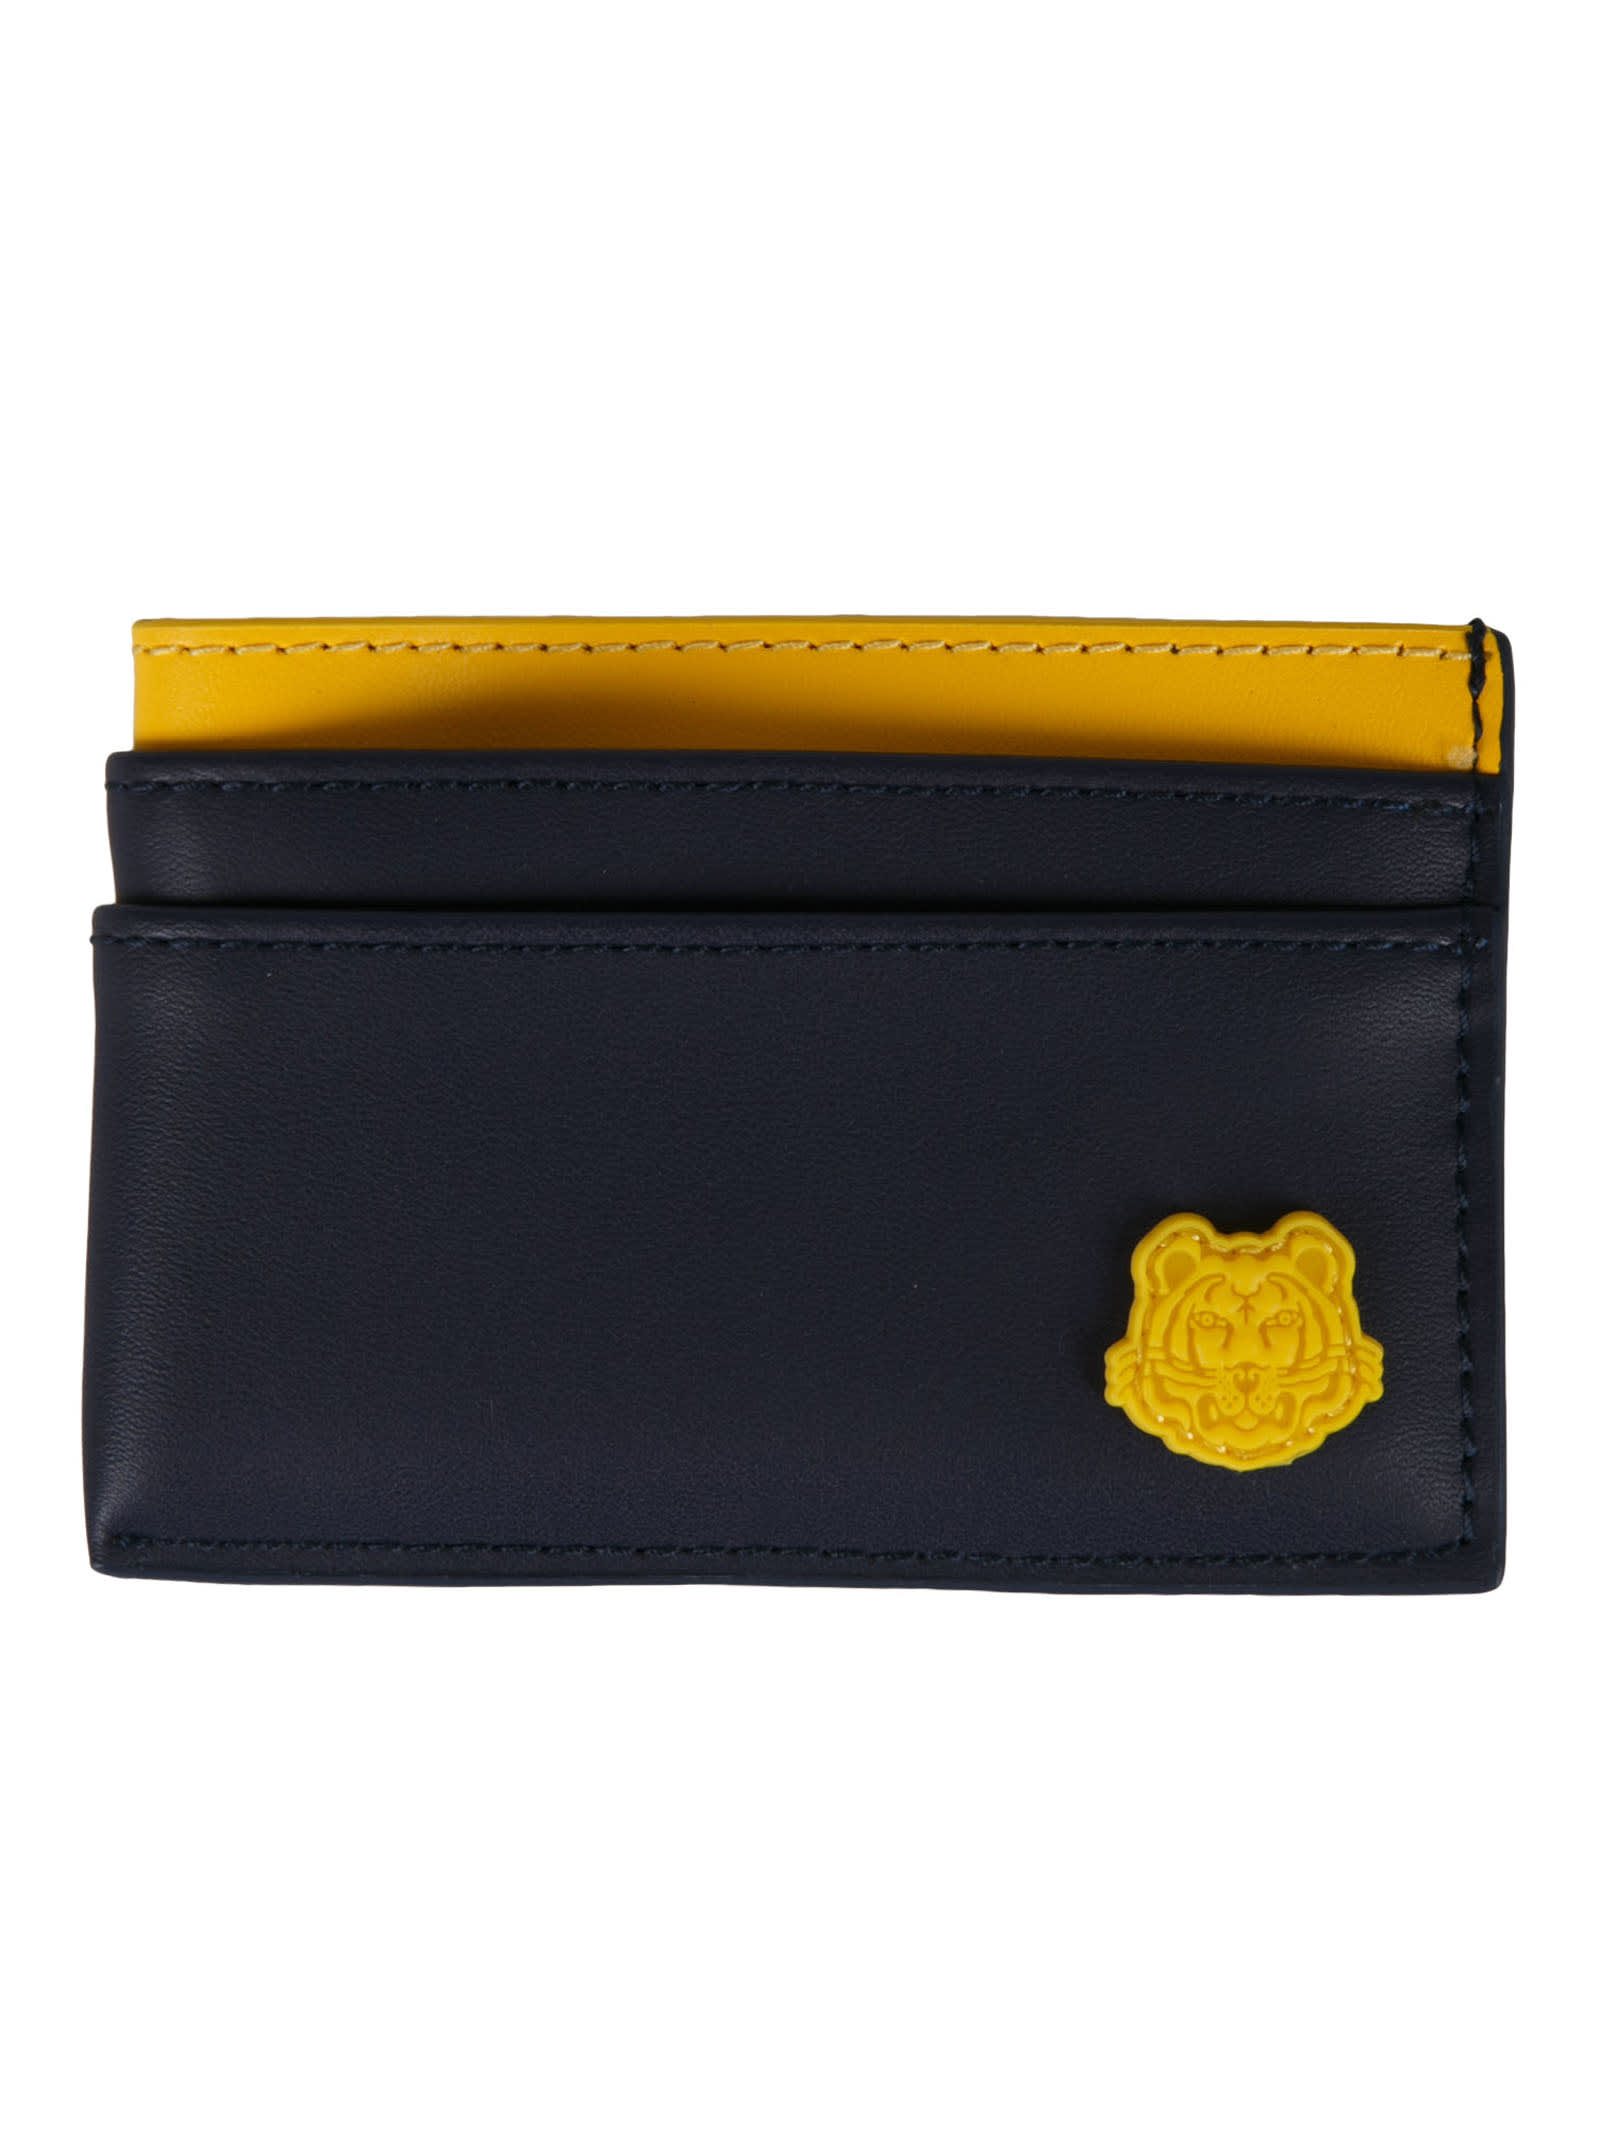 Kenzo Tiger Patched Card Holder